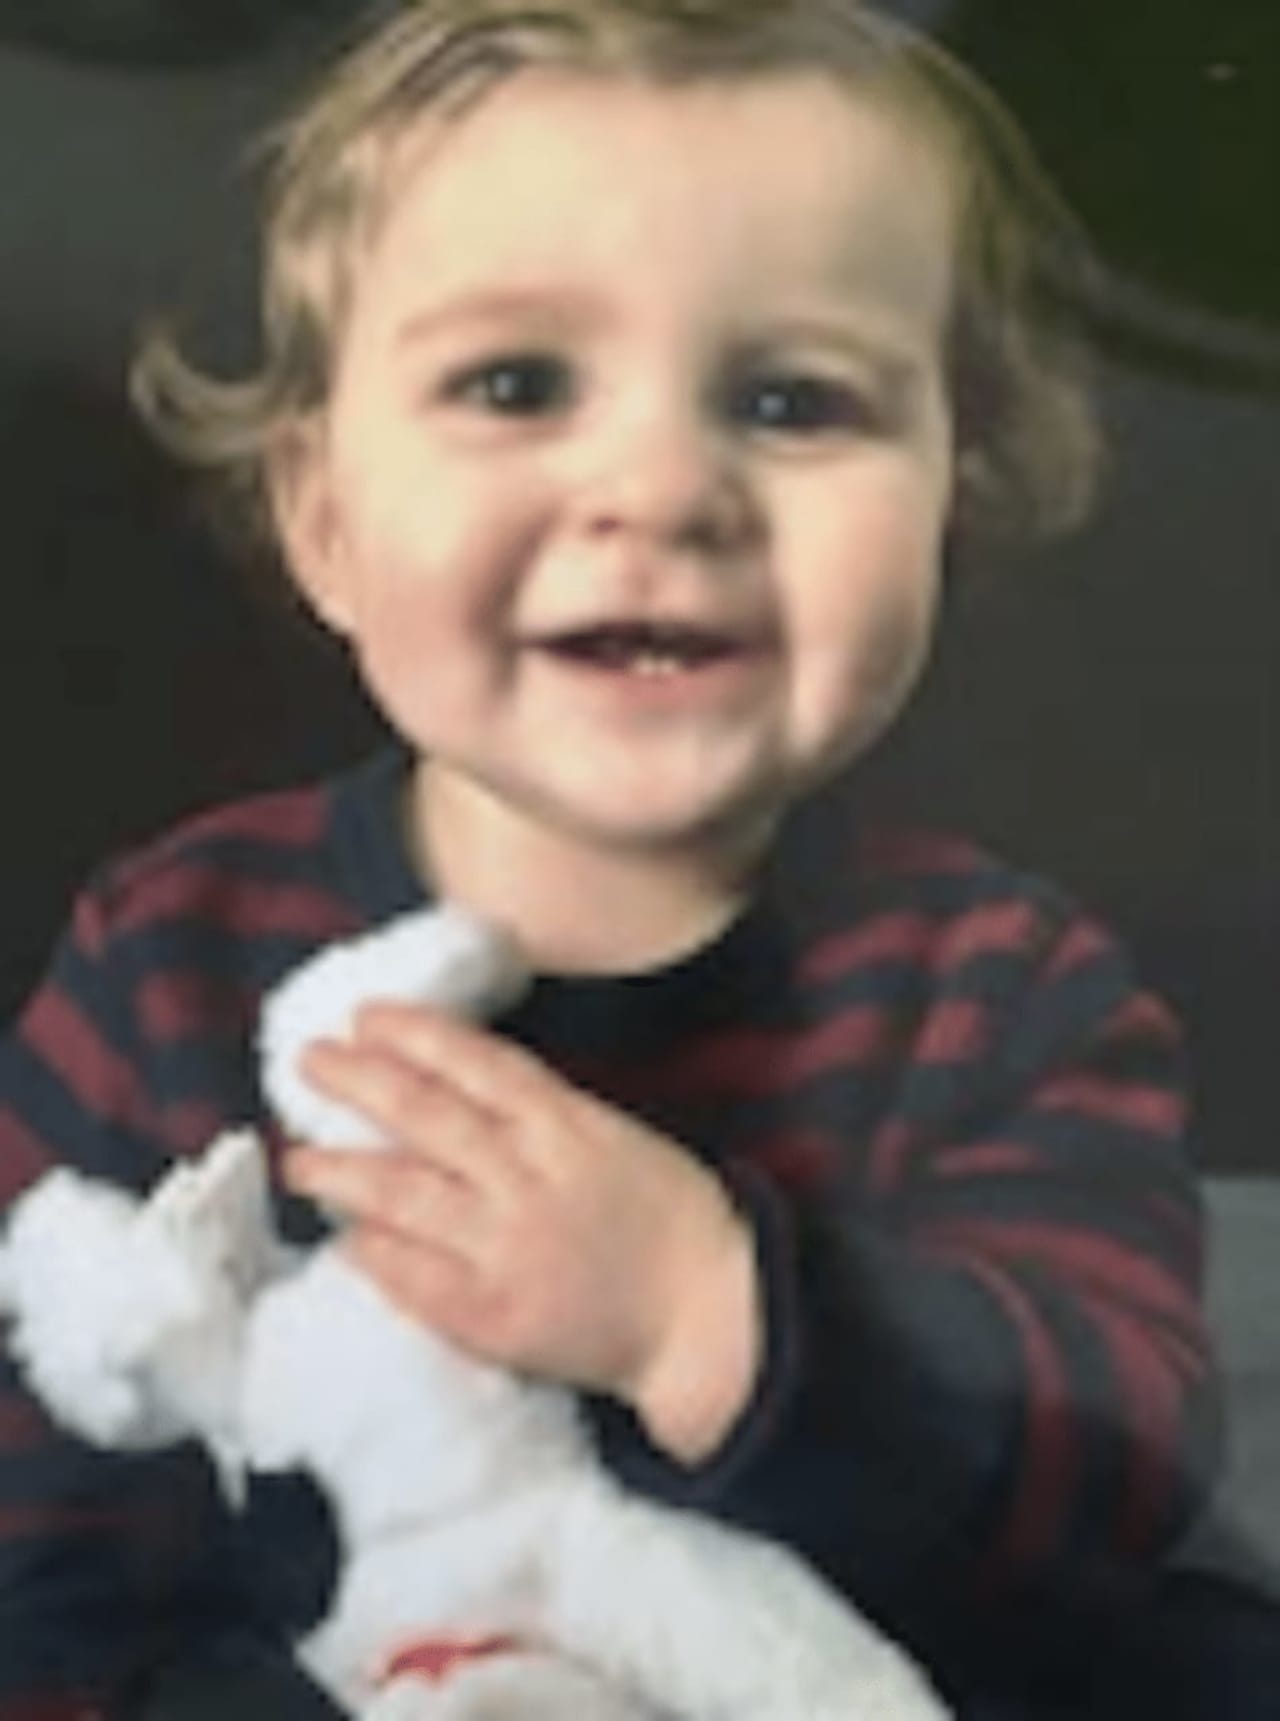 Crossfit locations across Fairfield County will hold fundraisers to fight AHC, a rare genetic disorder affecting one-year-old Cameron Simpson of Trumbull.